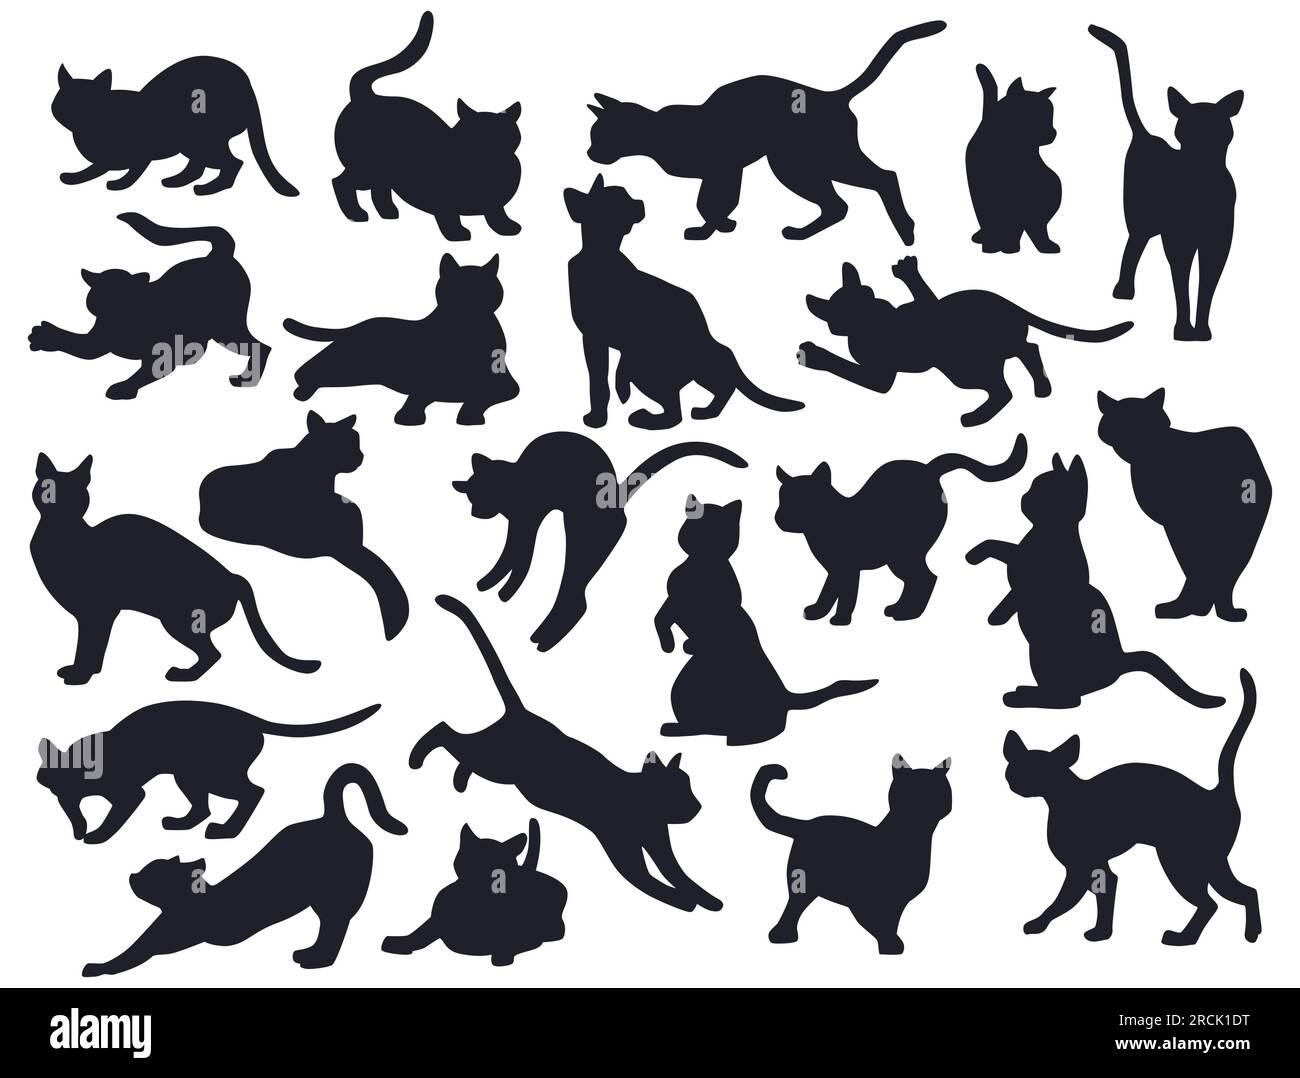 Cat silhouettes. Black icons, shadow animals sit, kitten tail pose, playful kitty pet standing. Cute funny domestic animals playing, vet clinic, isolated decor elements. Vector outline illustration Stock Vector